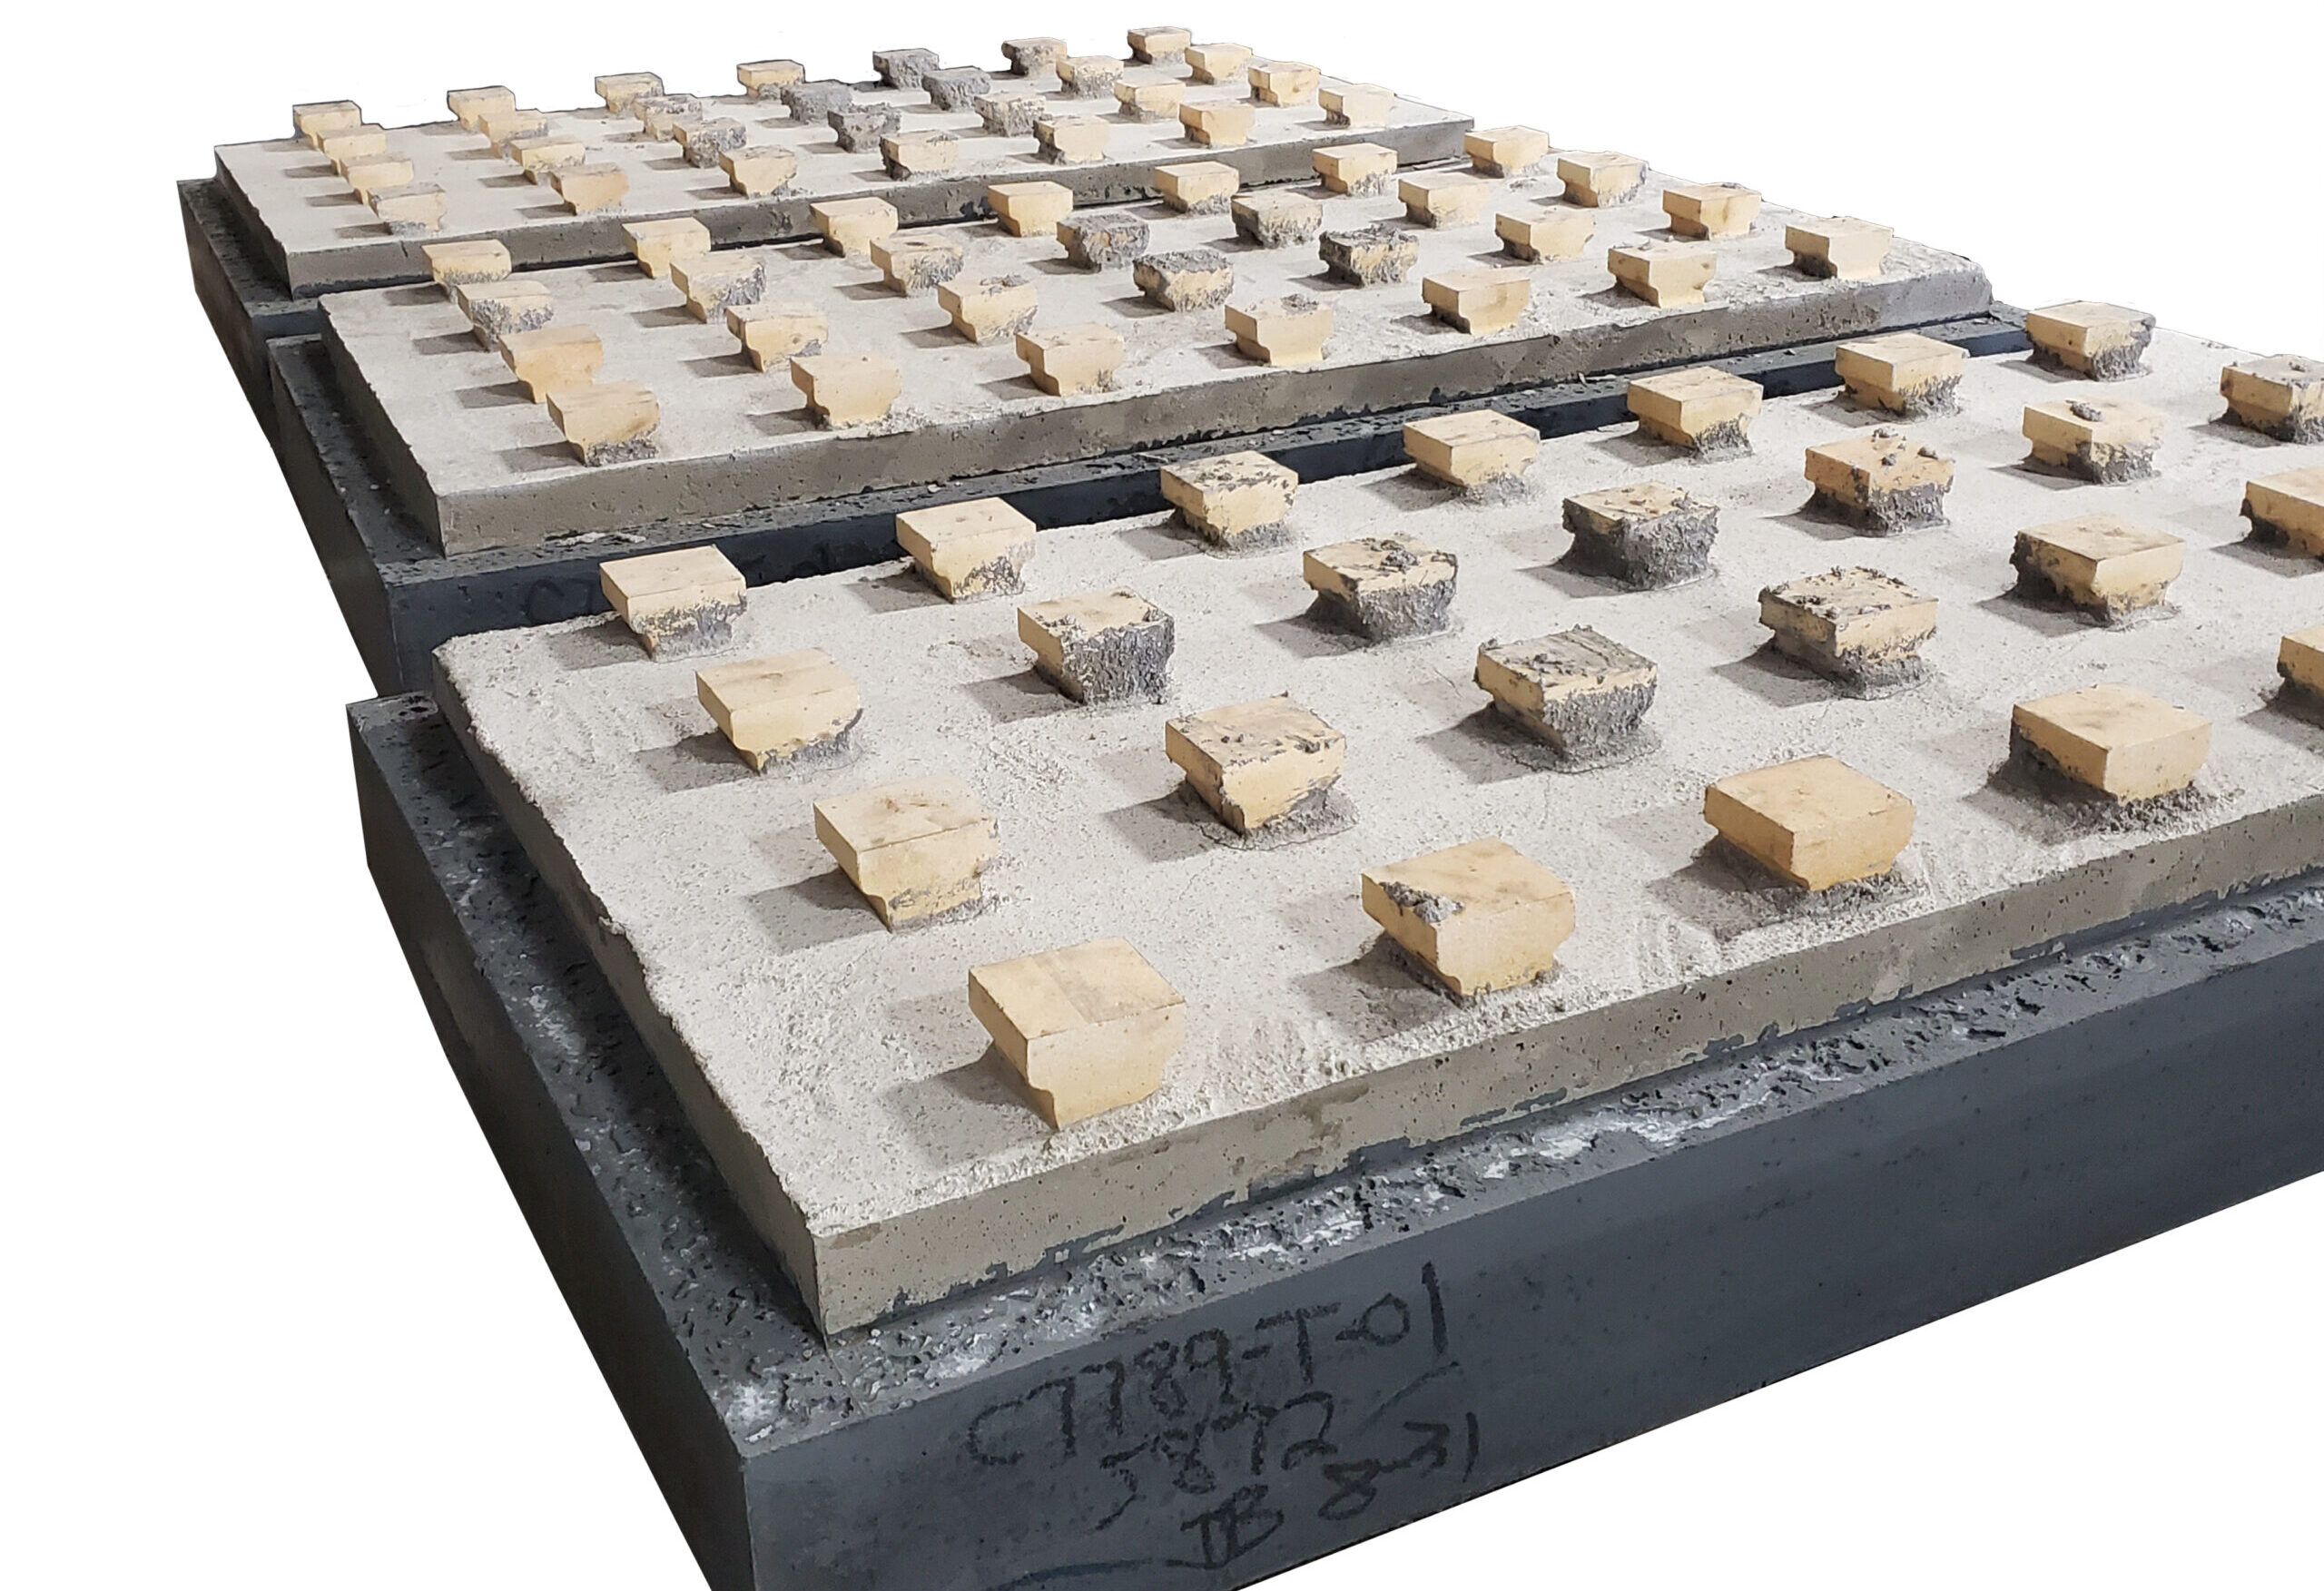 Figure 1. The high emissivity εMAXXX refractory technology used in the aluminum furnace roof blocks for the trial. 